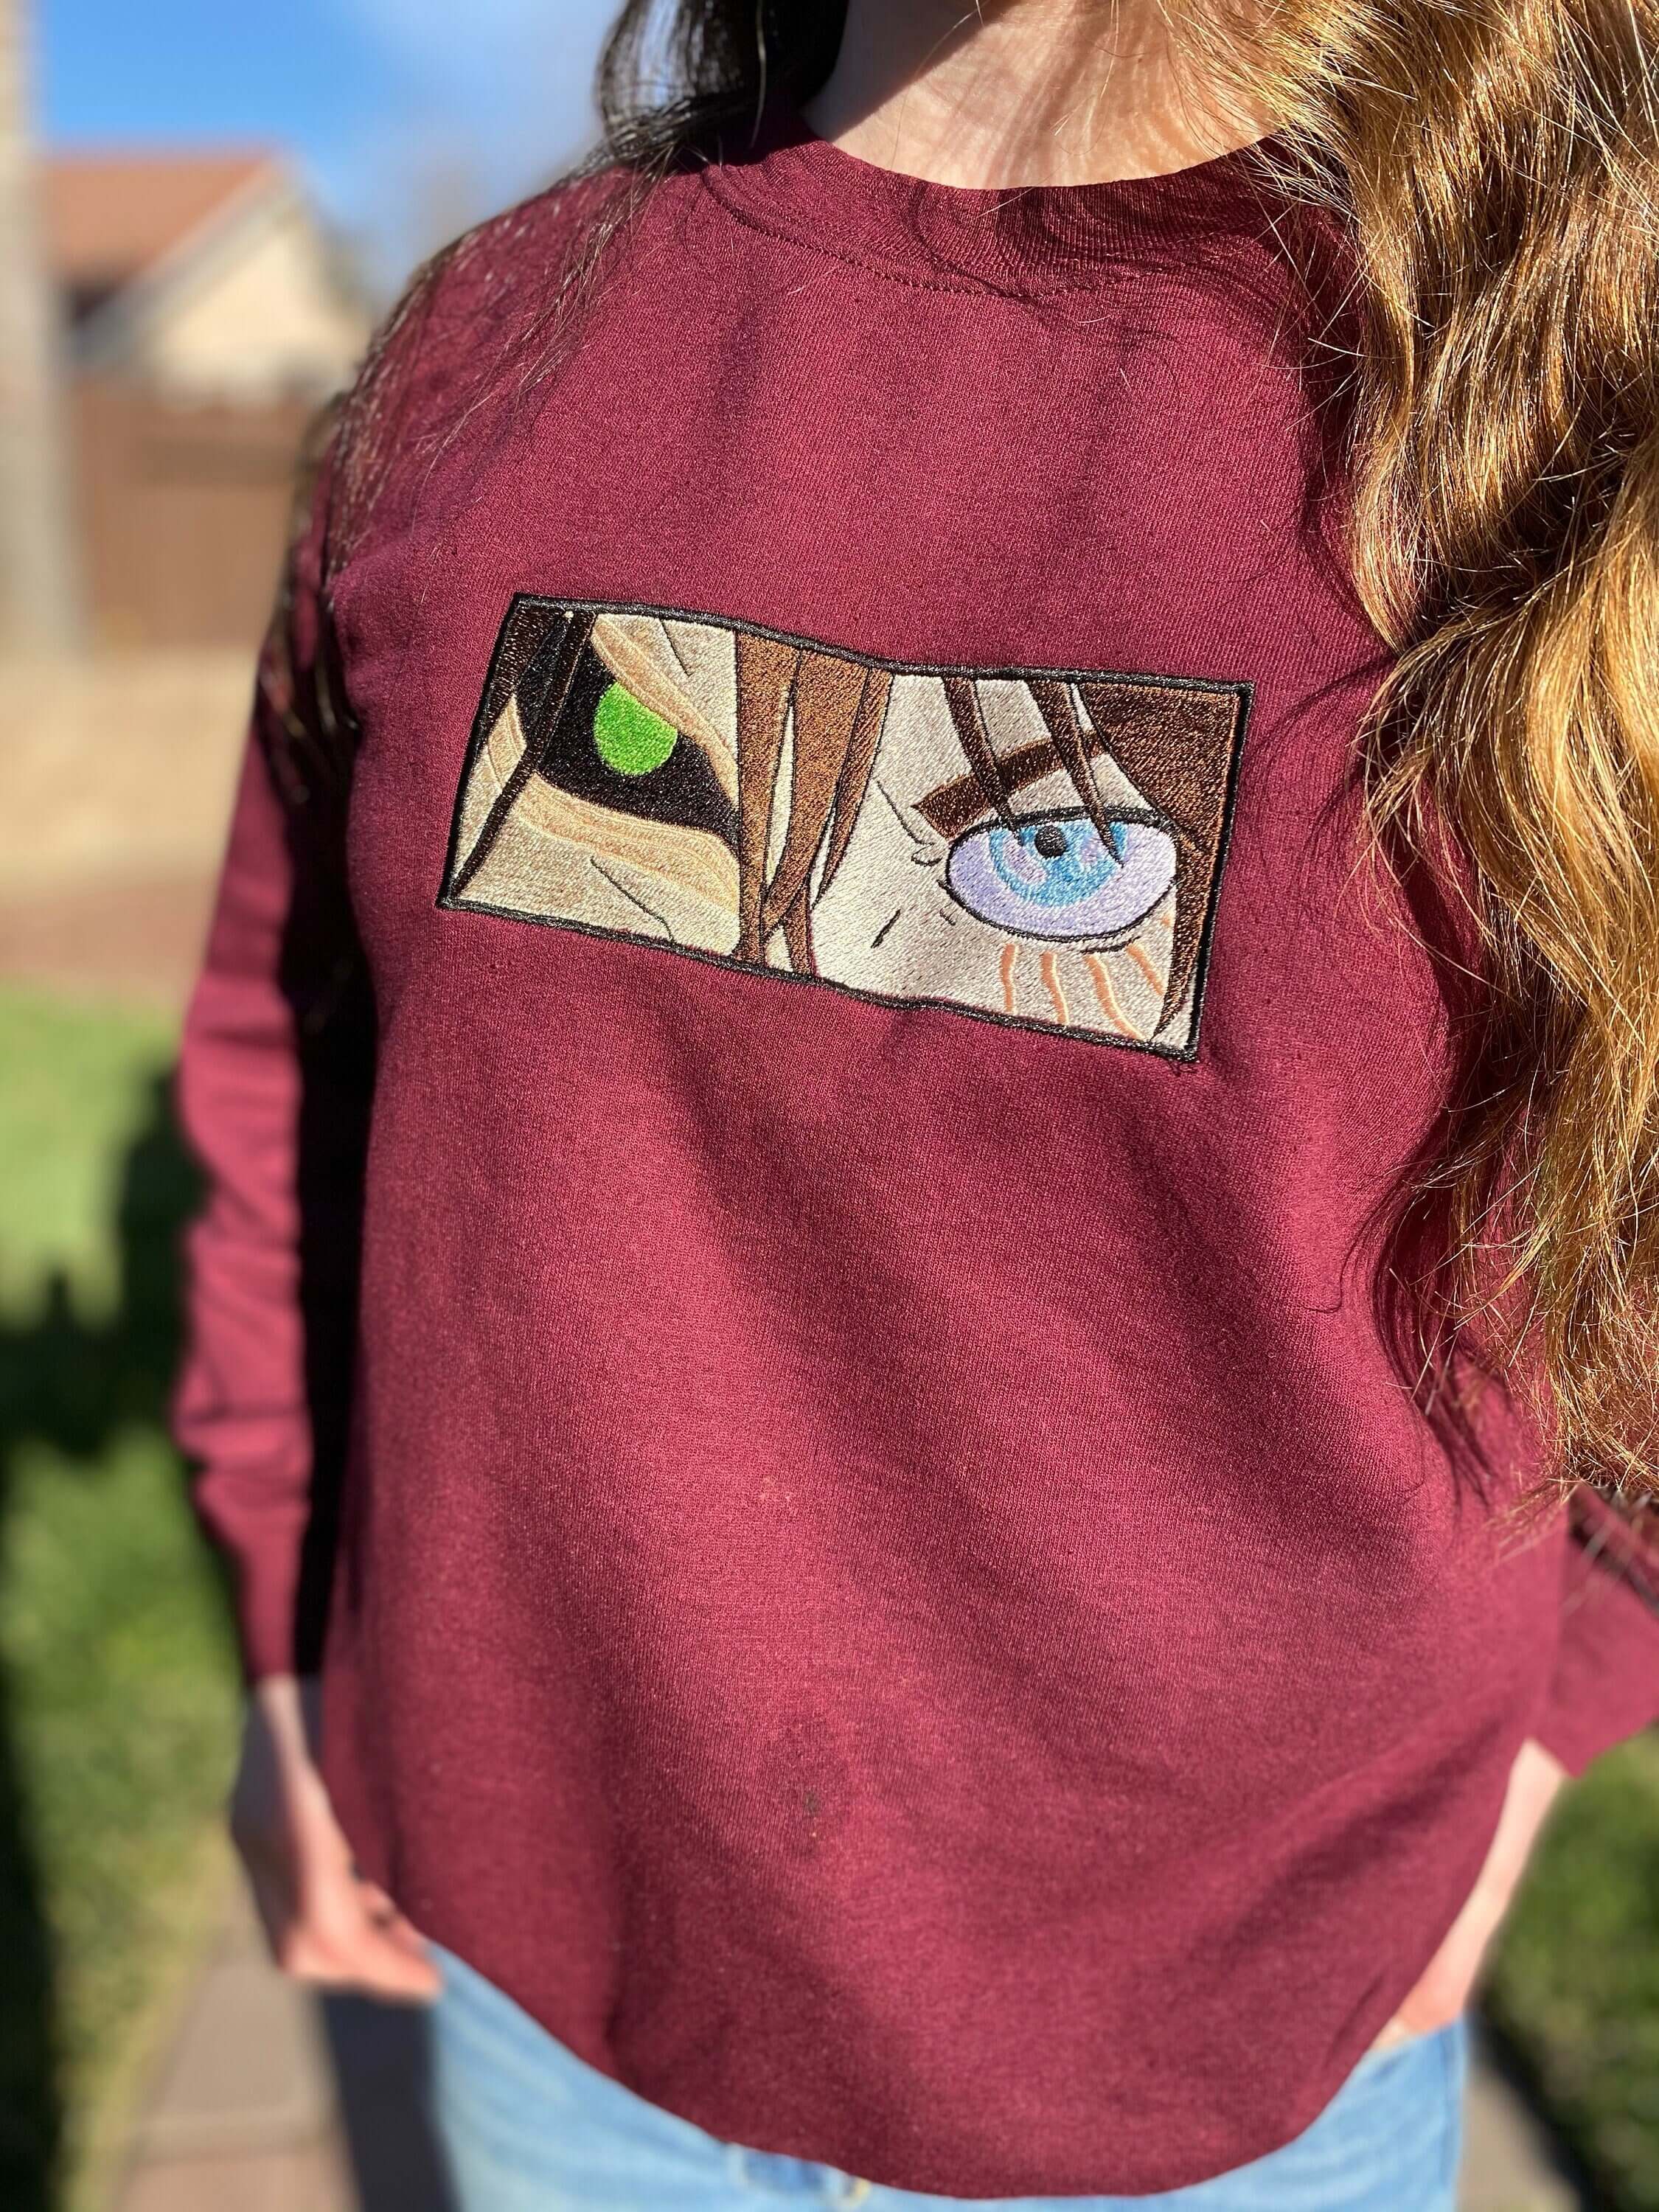 Anime Sweatshirt /Embroidered sweatshirt / AOT/ Embroidery Crewneck / Anime hoodie / cosplay gift/ gift for him / gift for her